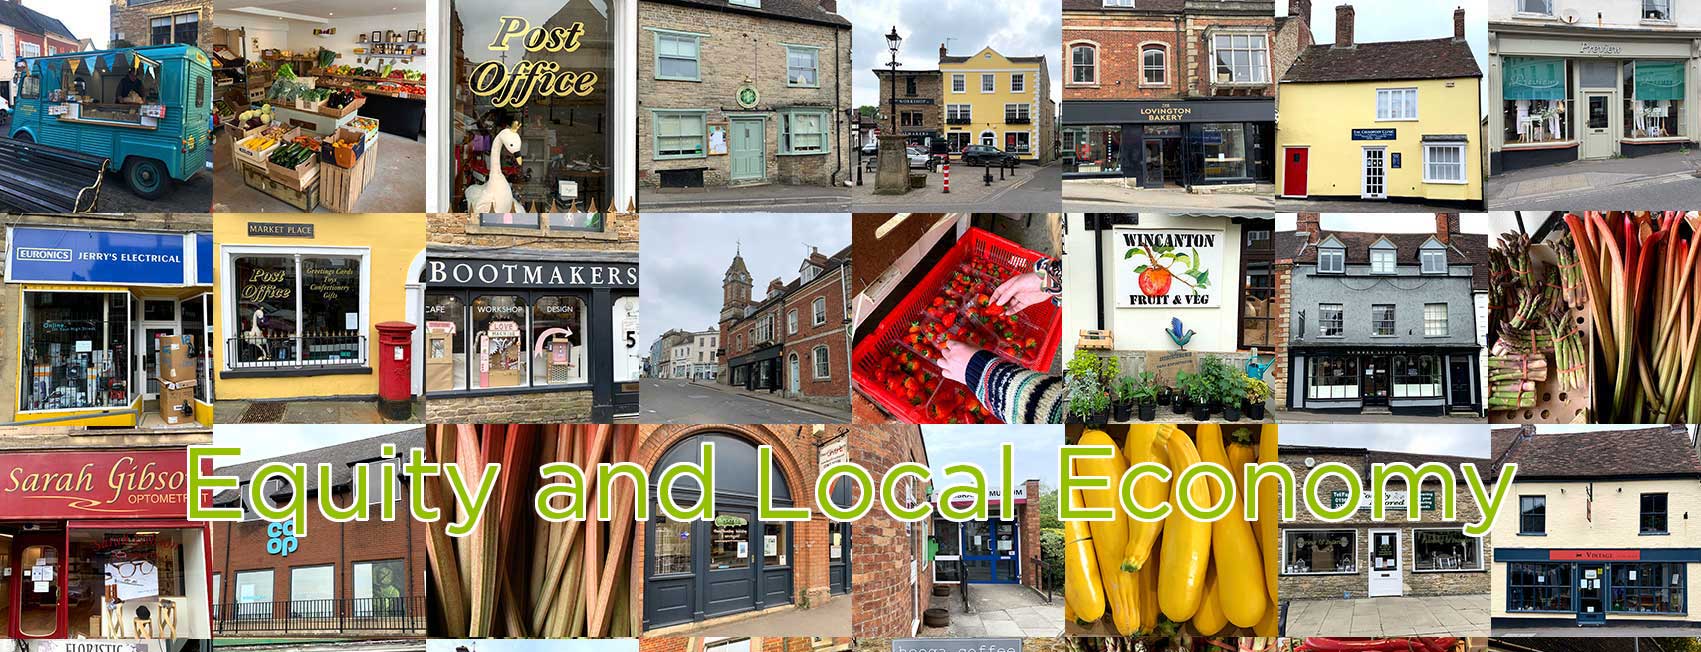 Equity and local economy
          page